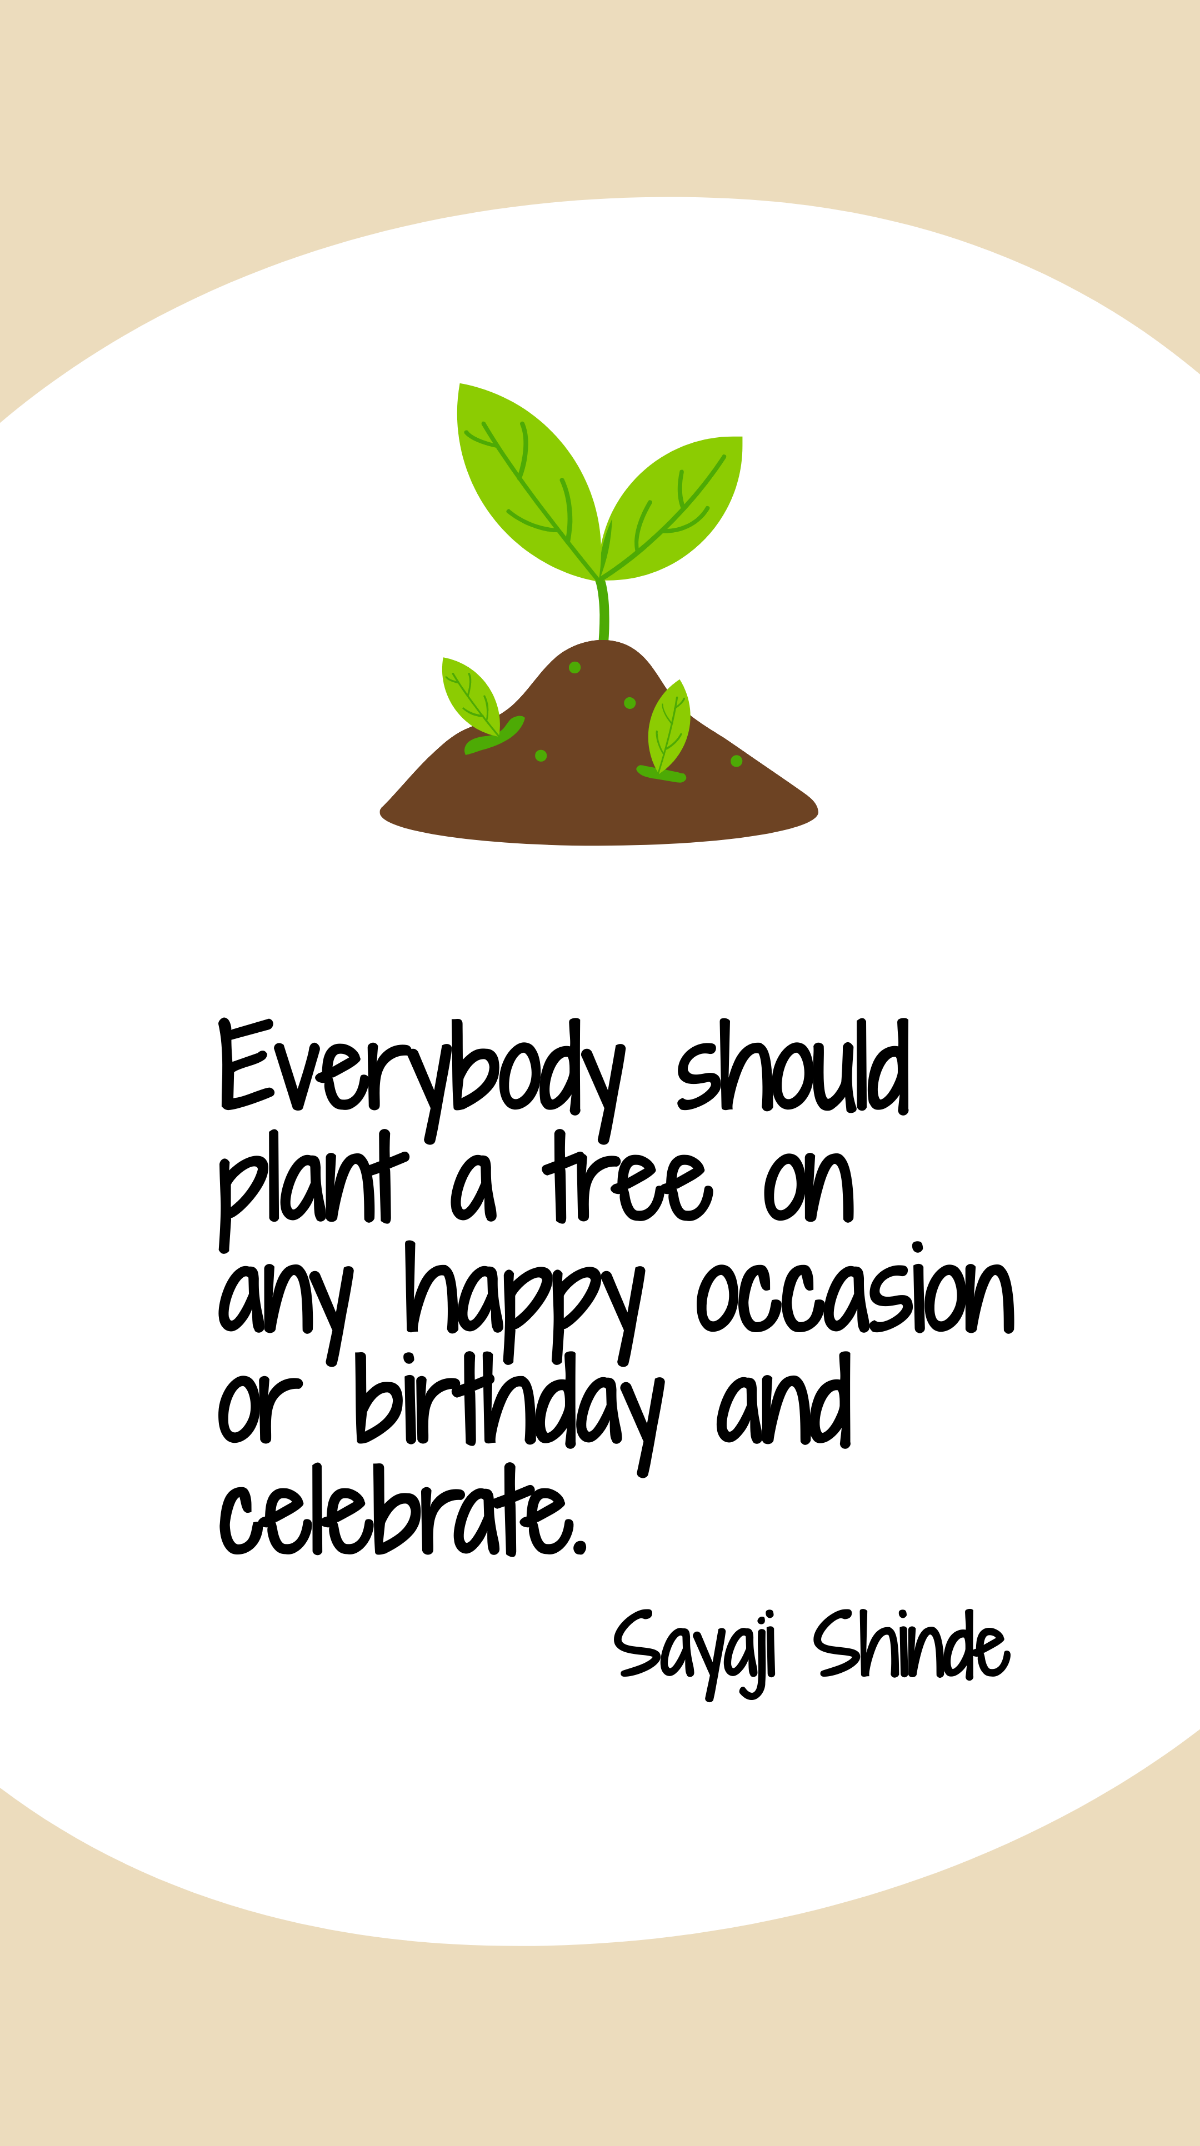 Sayaji Shinde - Everybody should plant a tree on any happy occasion or birthday and celebrate. Template